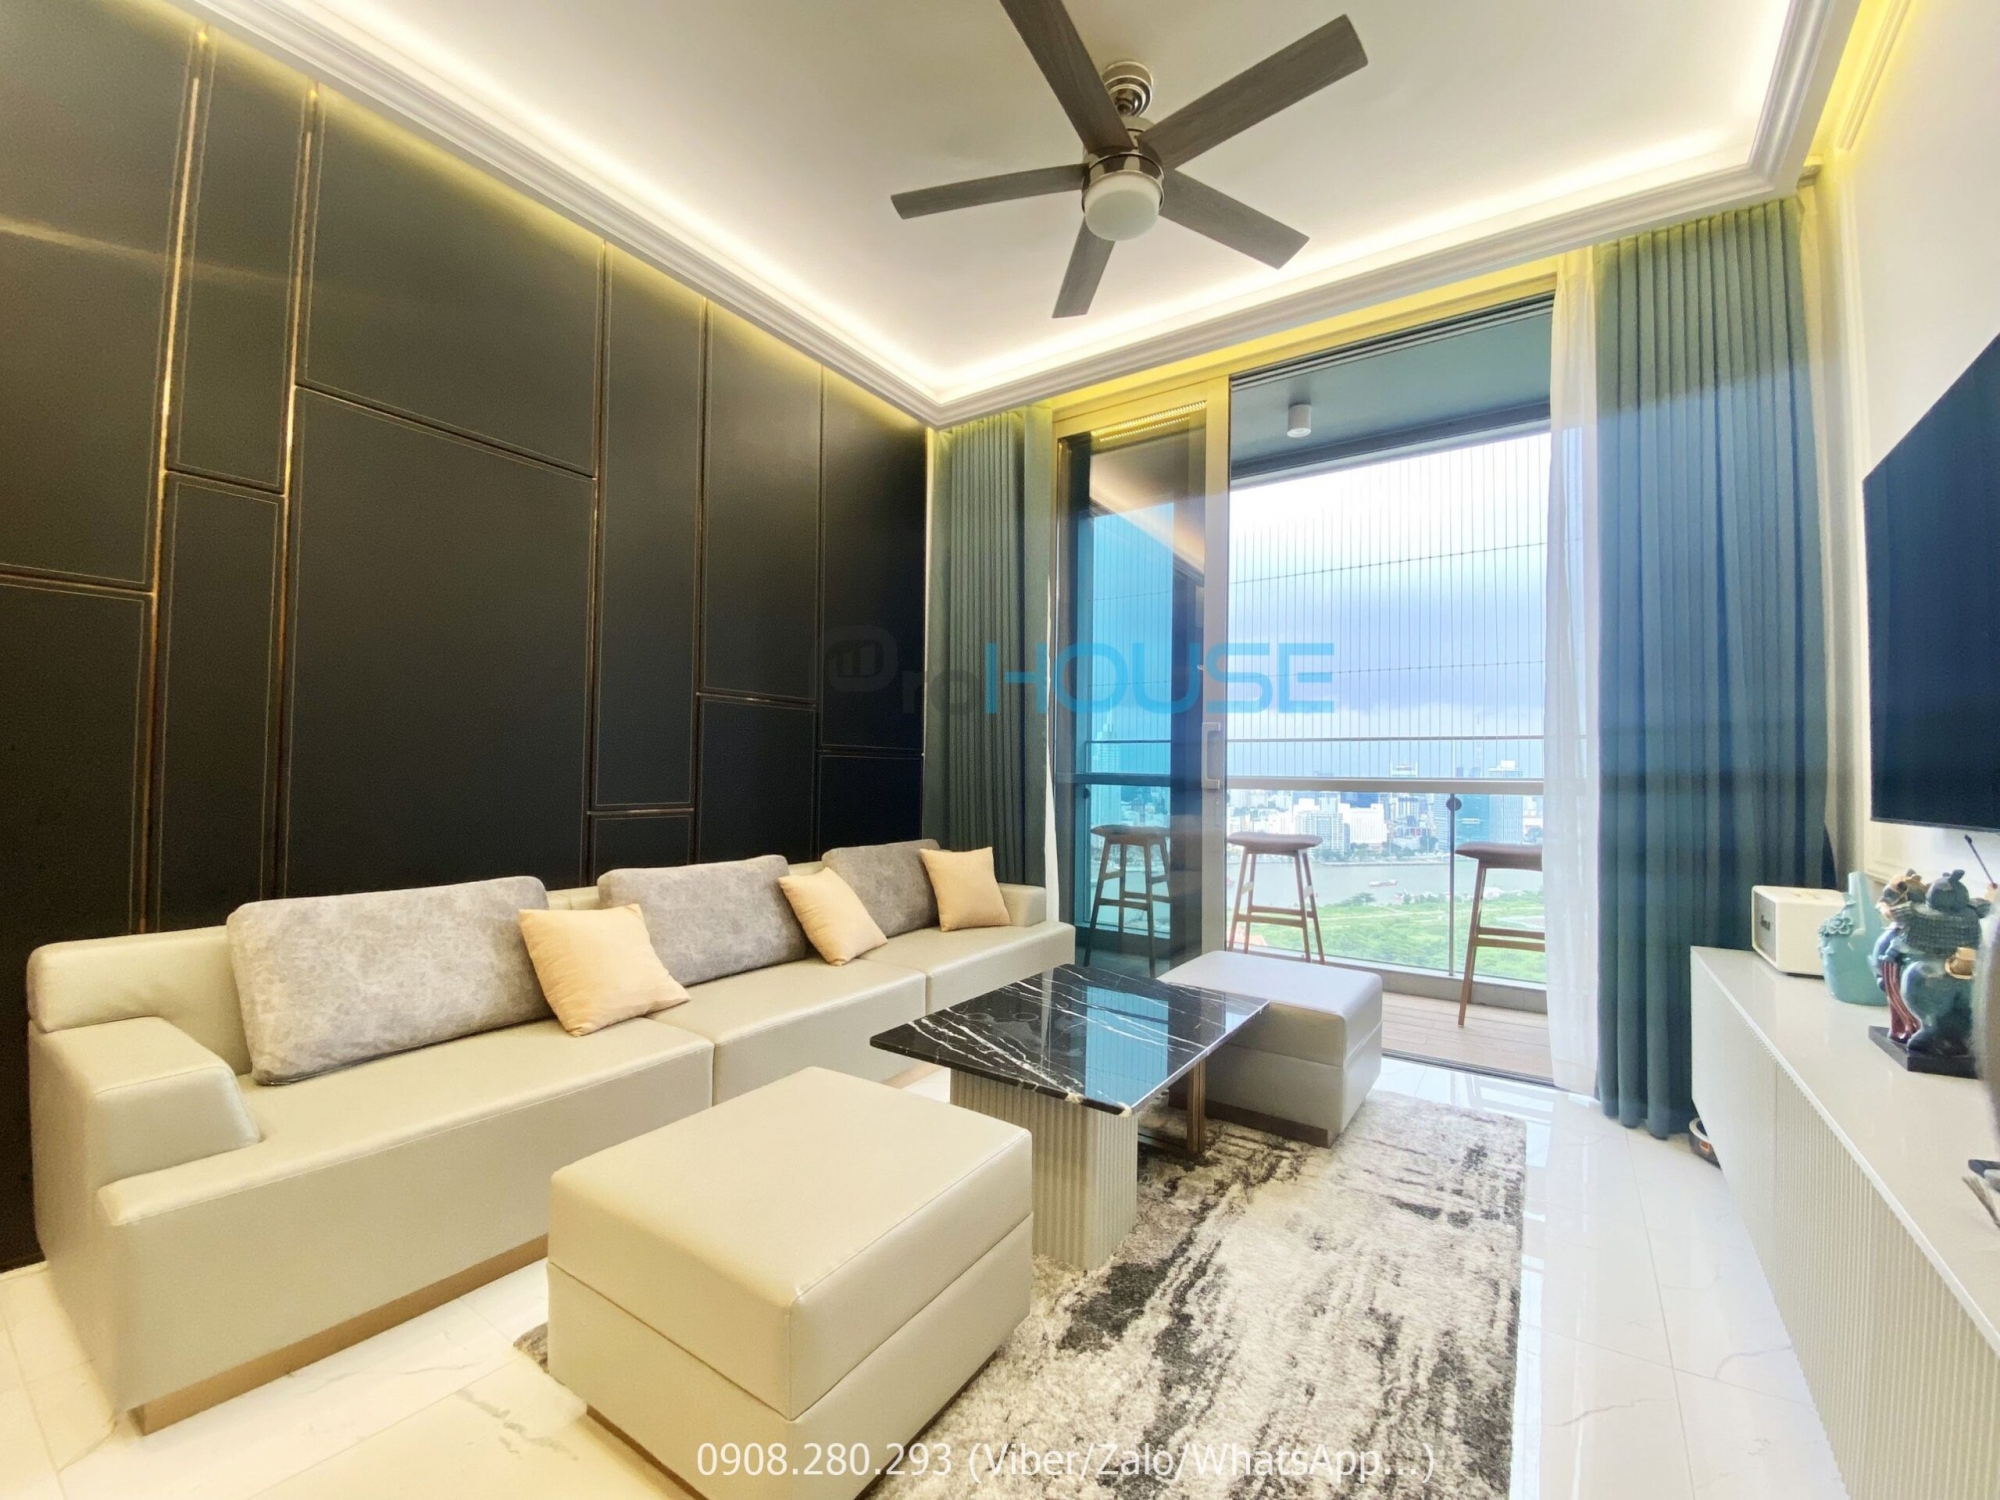 THE MOST BEAUTIFUL VIEW OF 2 BEDROOM APARTMENT IN EMPIRE CITY FOR RENT